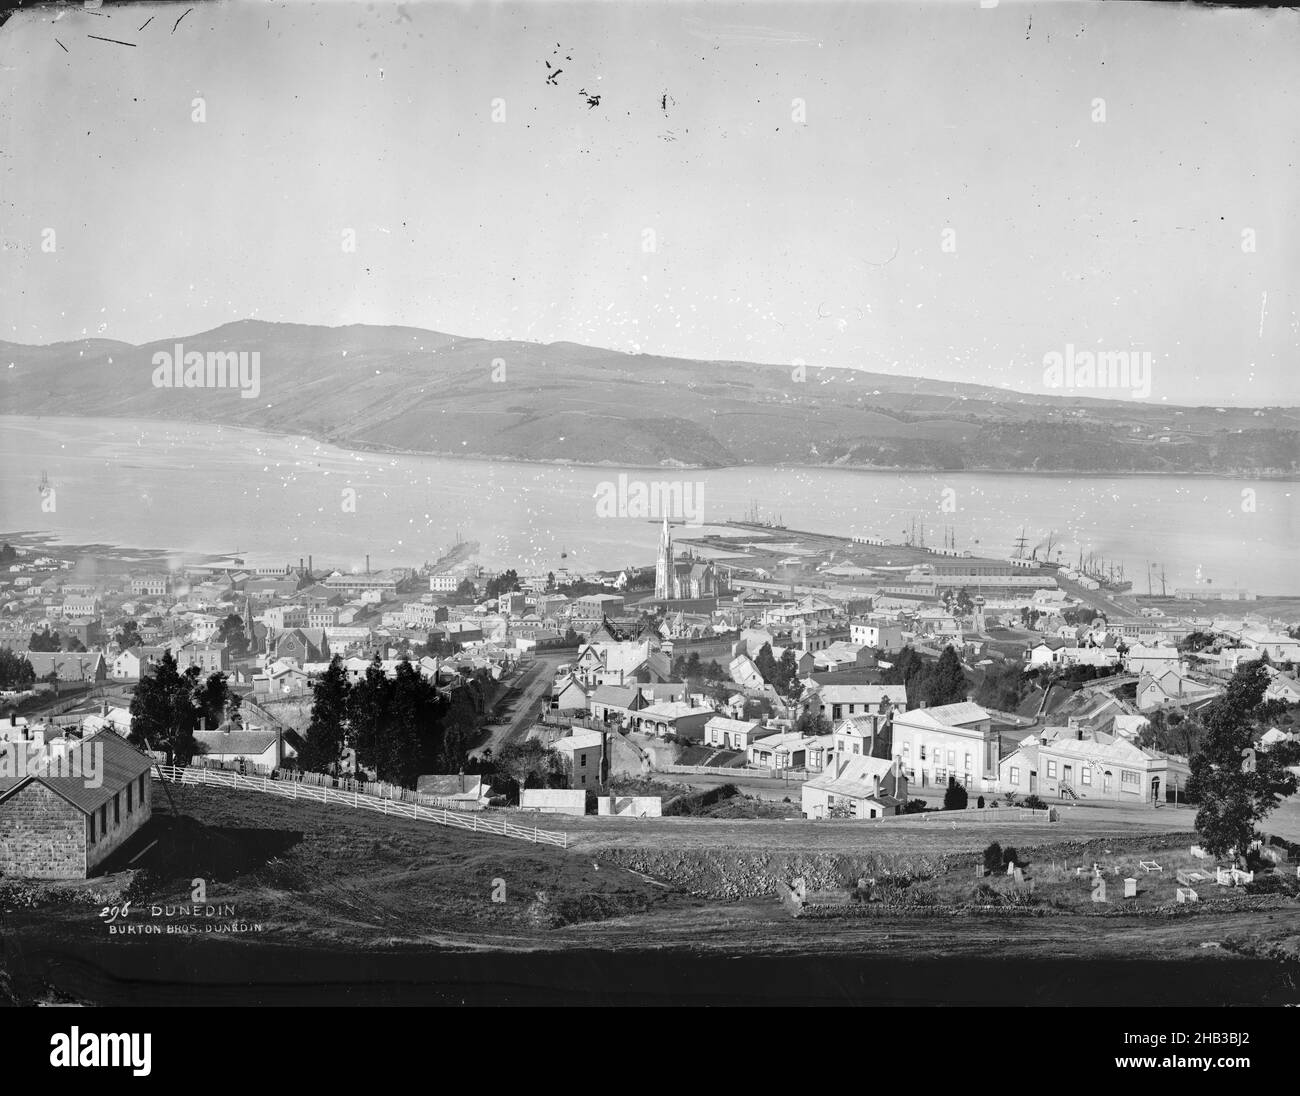 Dunedin, Burton Brothers studio, photography studio, 1870s, Dunedin, black-and-white photography, View from above town belt above Salutation Hotel across city to harbour and hills behind, the first (1st) church is visible in the centre of the image Stock Photo